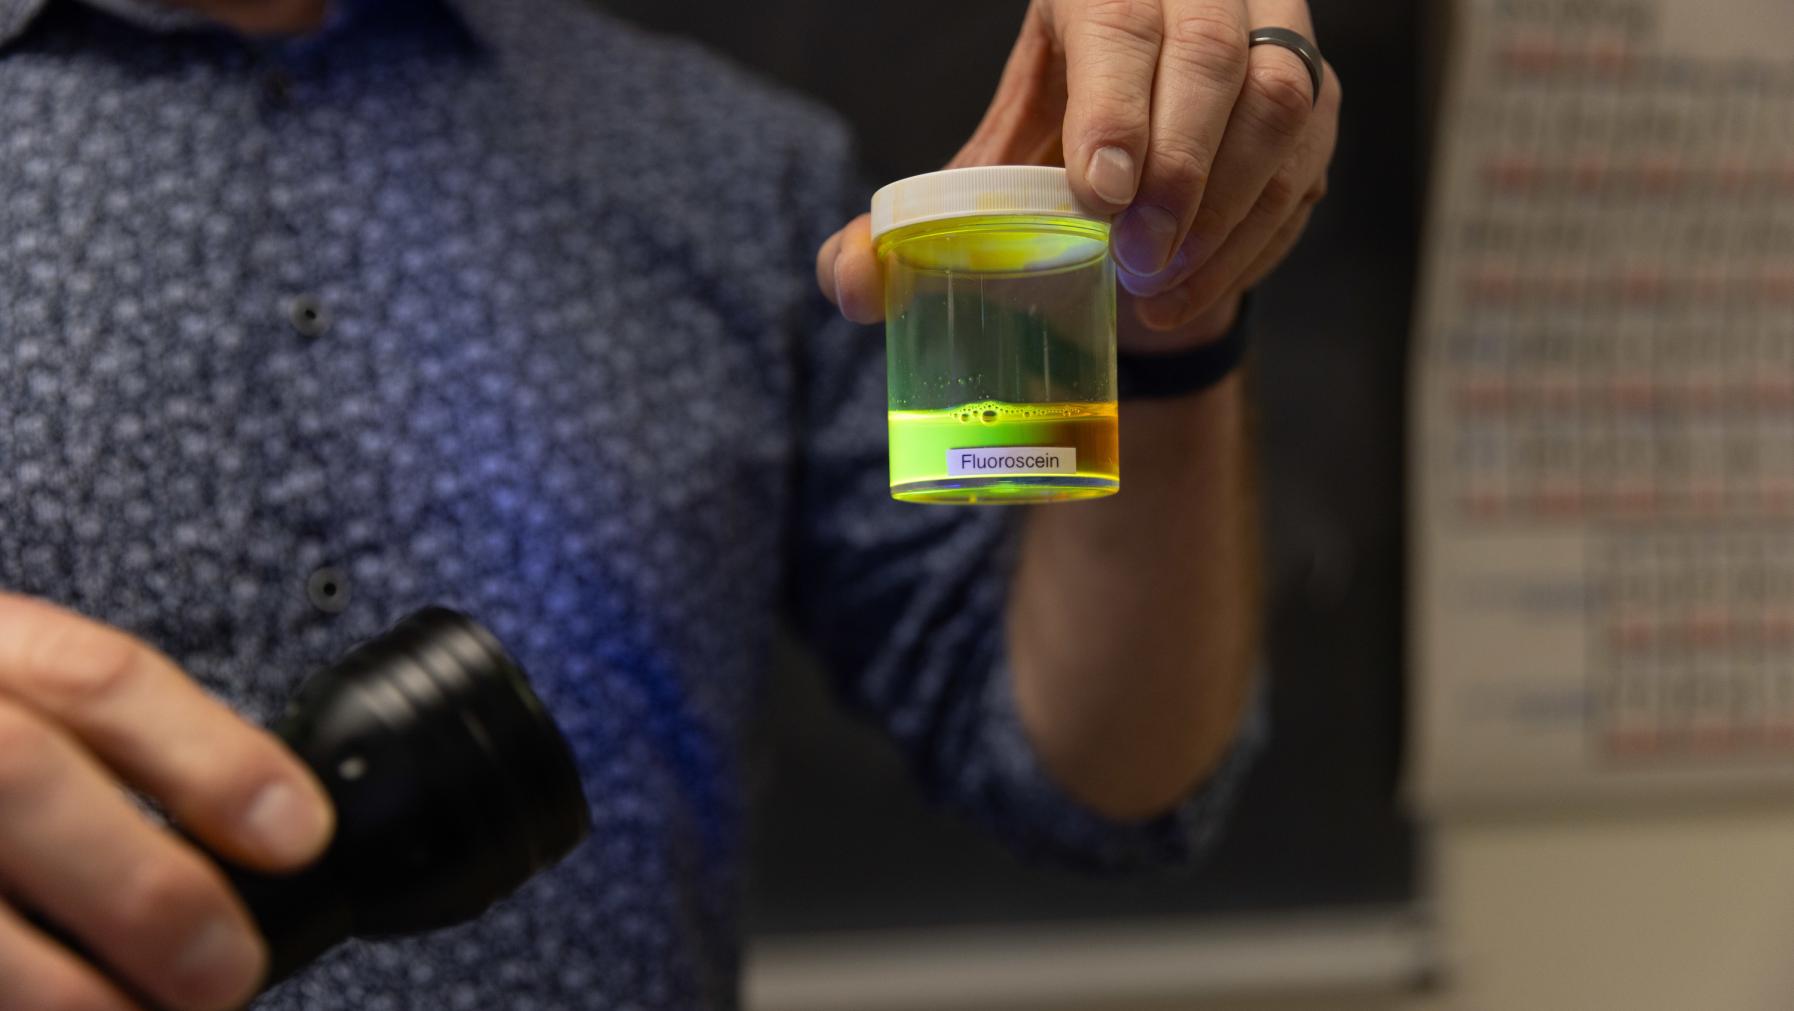 Prof. Dan Burgard shines an ultraviolet light on a liquid in a glass container to produce a green/orange.